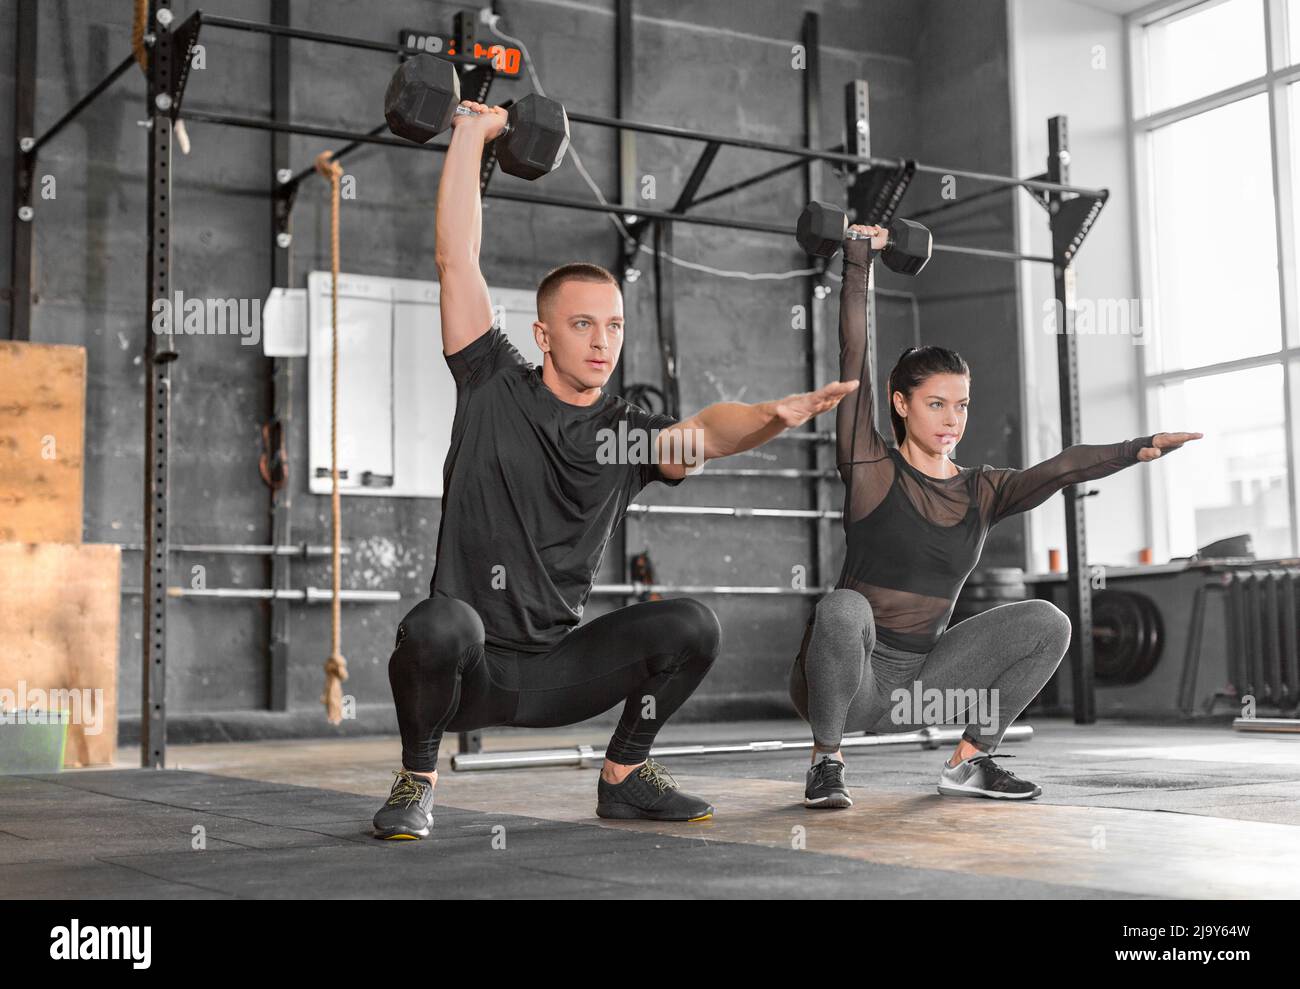 Fitness couple in gym working out together. Teamwork concept. Stock Photo